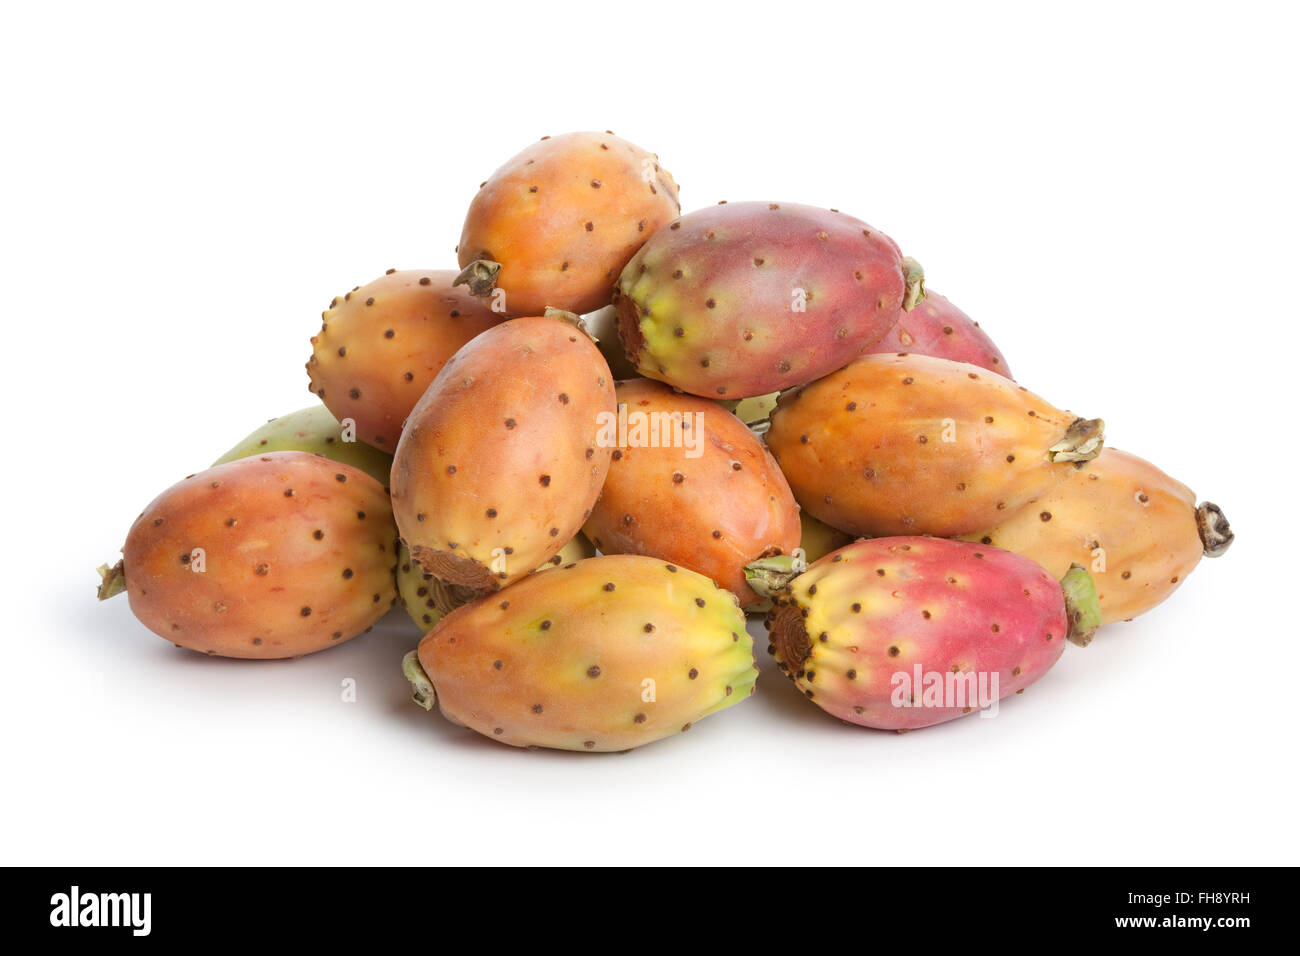 Fresh raw whole prickly pears on white background Stock Photo